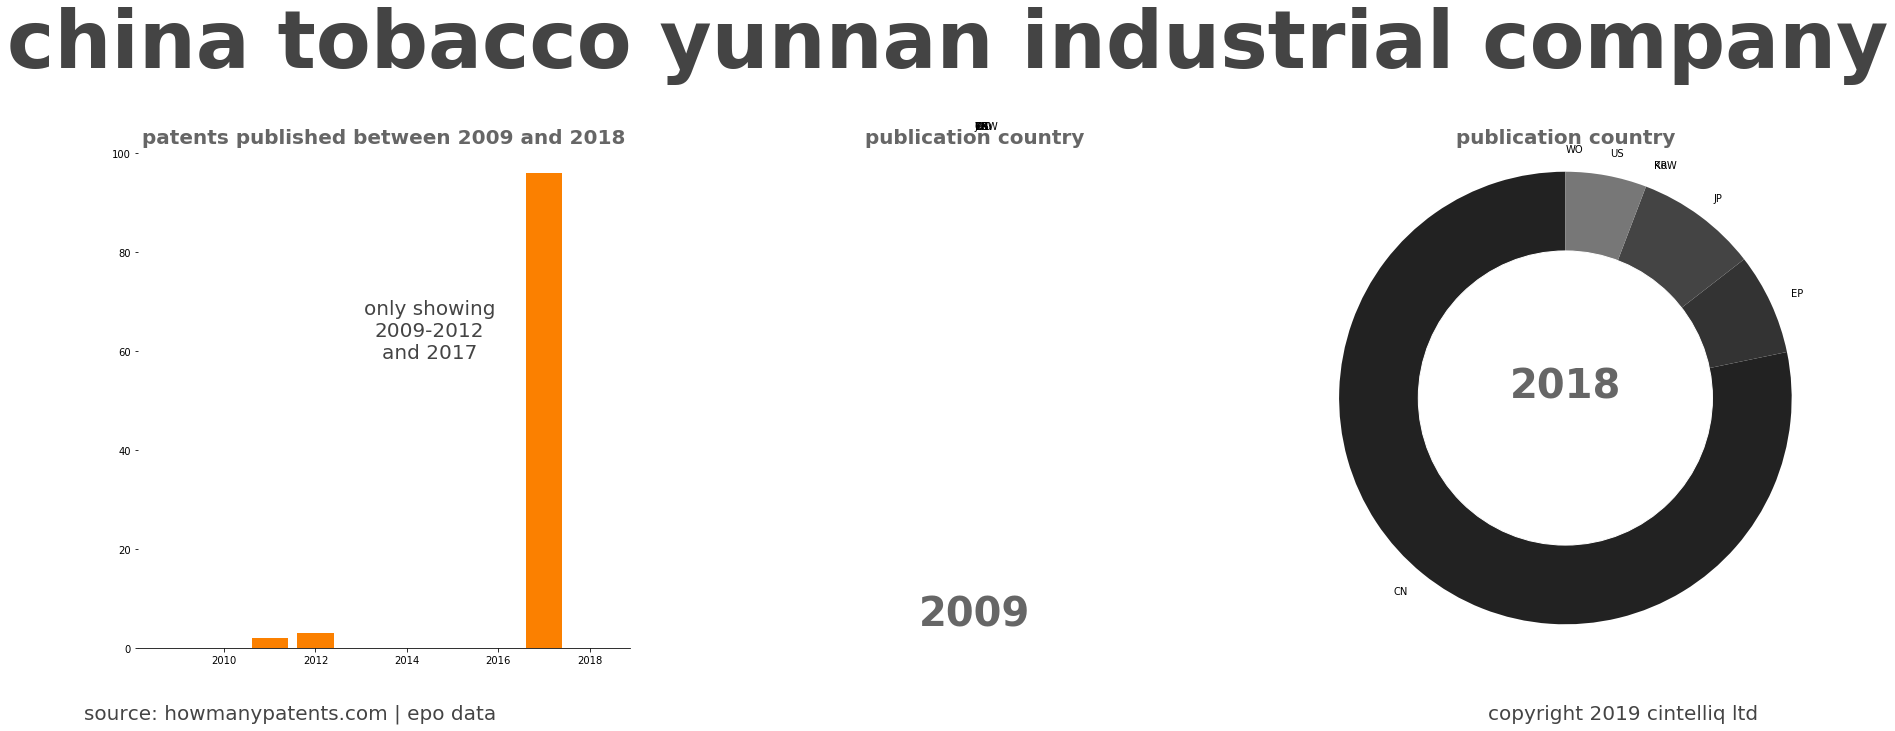 summary of patents for China Tobacco Yunnan Industrial Company